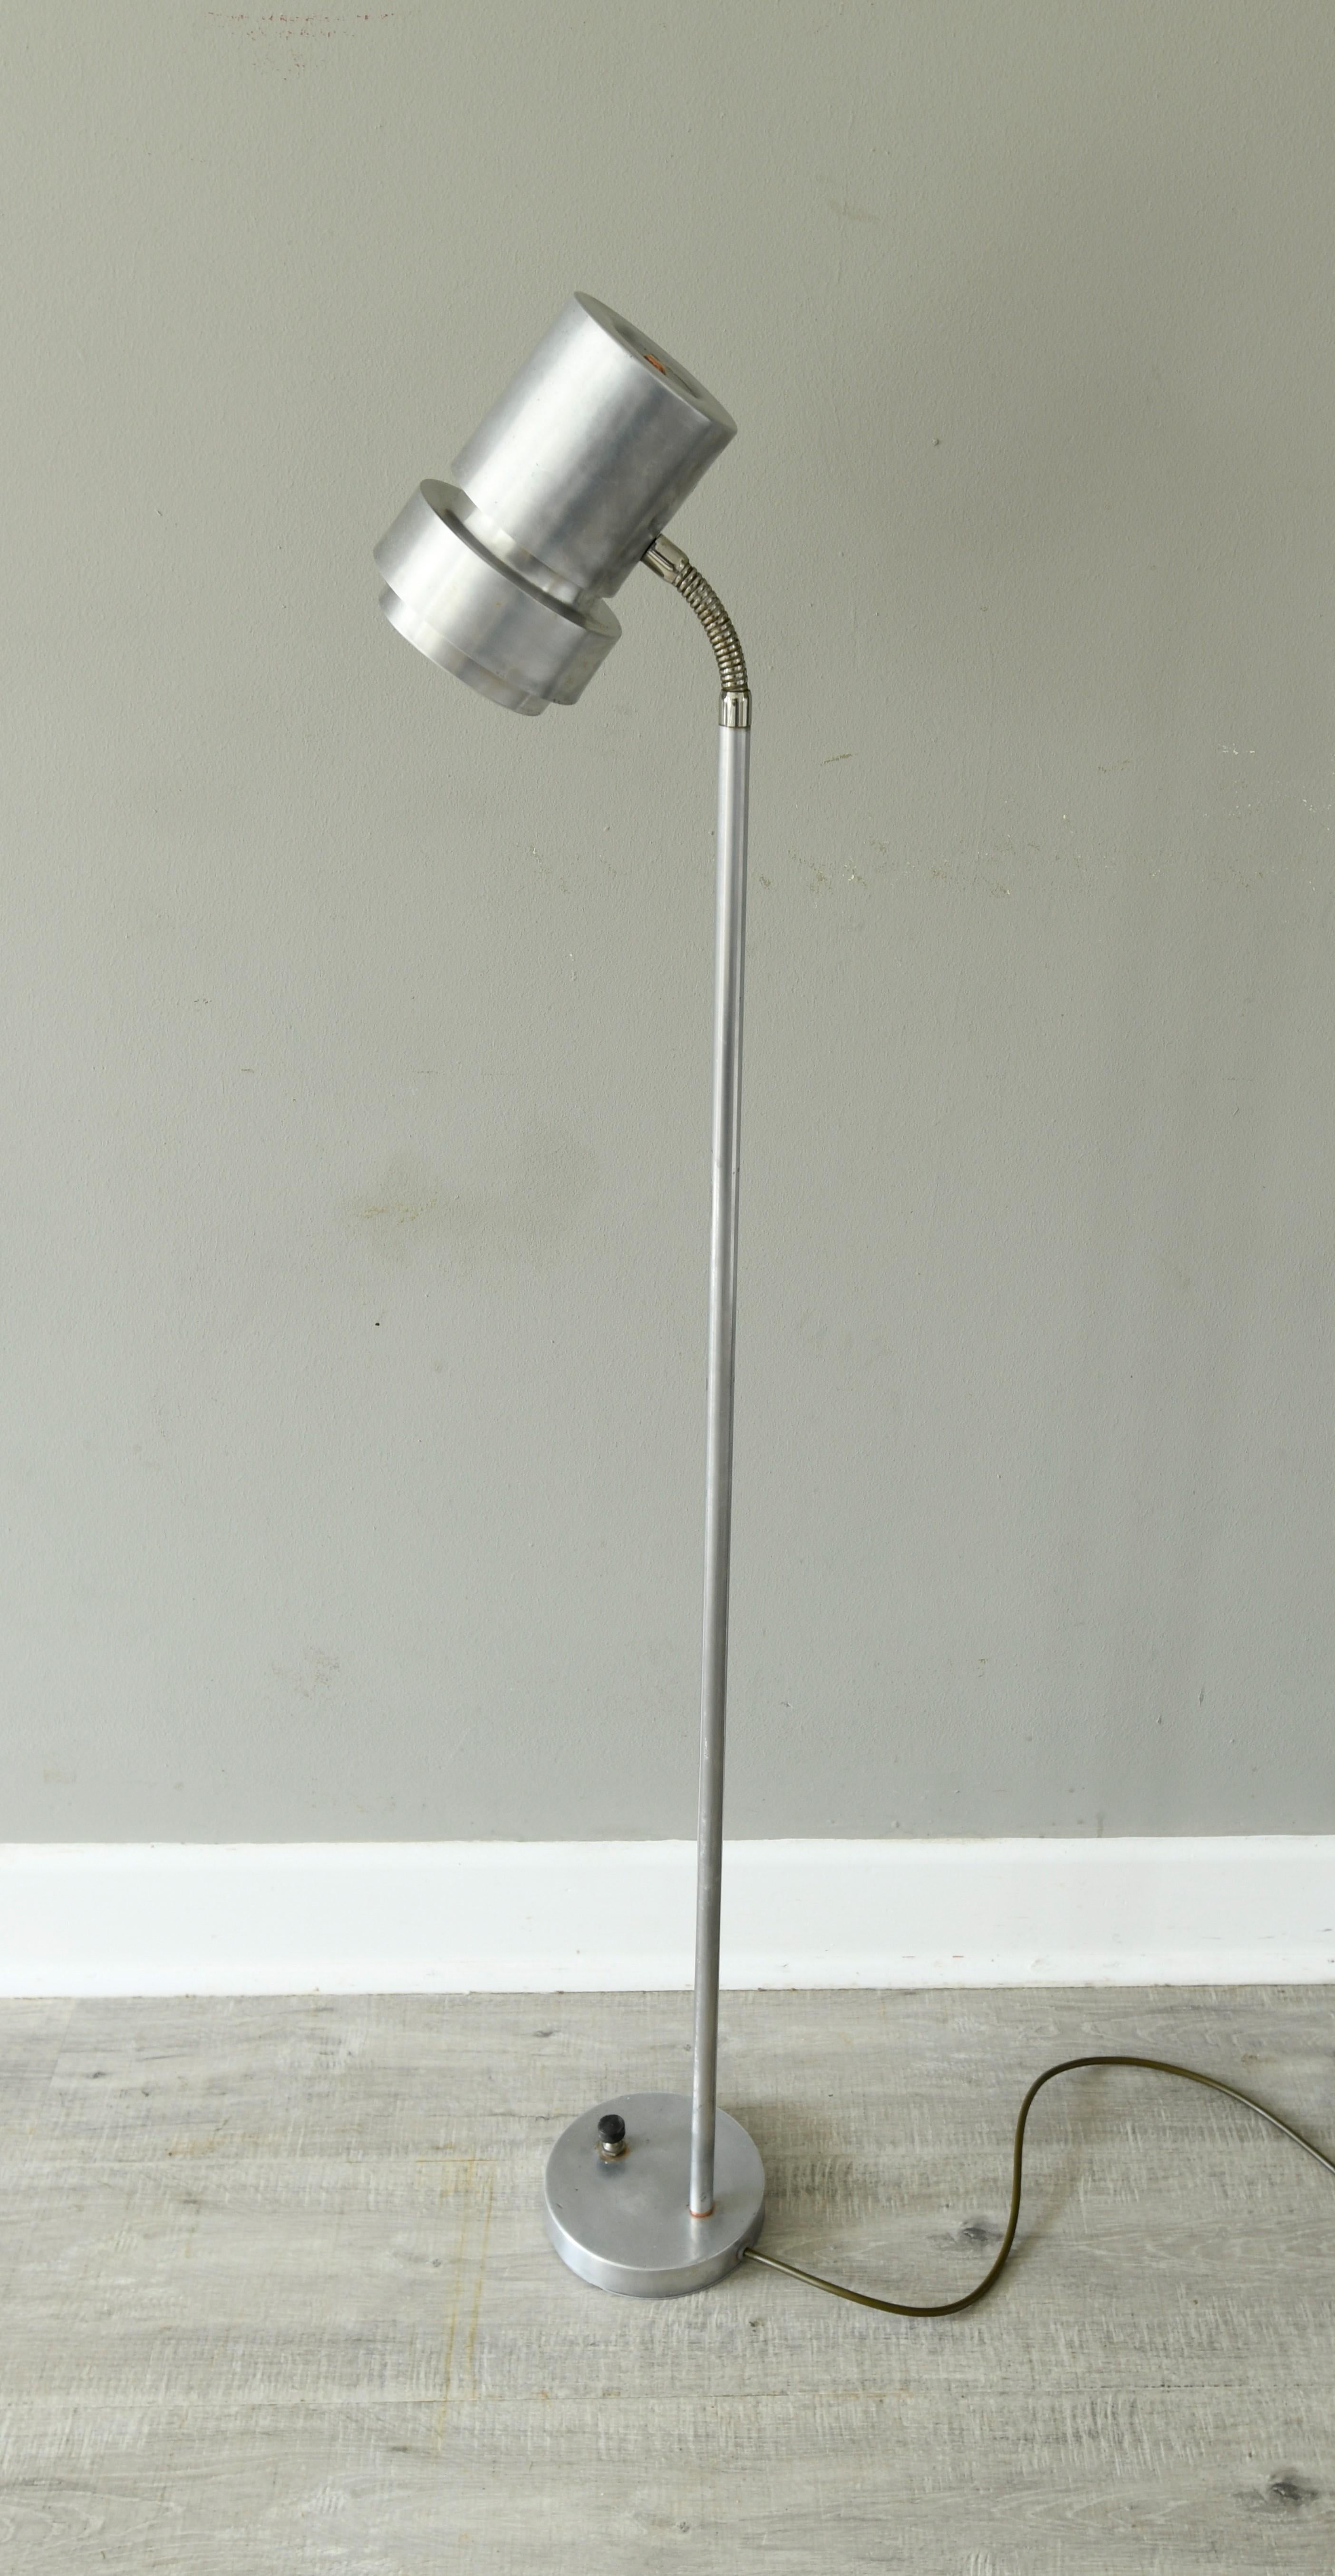 A floor lamp designed and made in Norway by Tr & Co (T. Røste), circa in the second half of the 1960s. The lamp is fully working and makes for a great book reading floor lamp there's pitting to metal which adds to the character of this amazingly